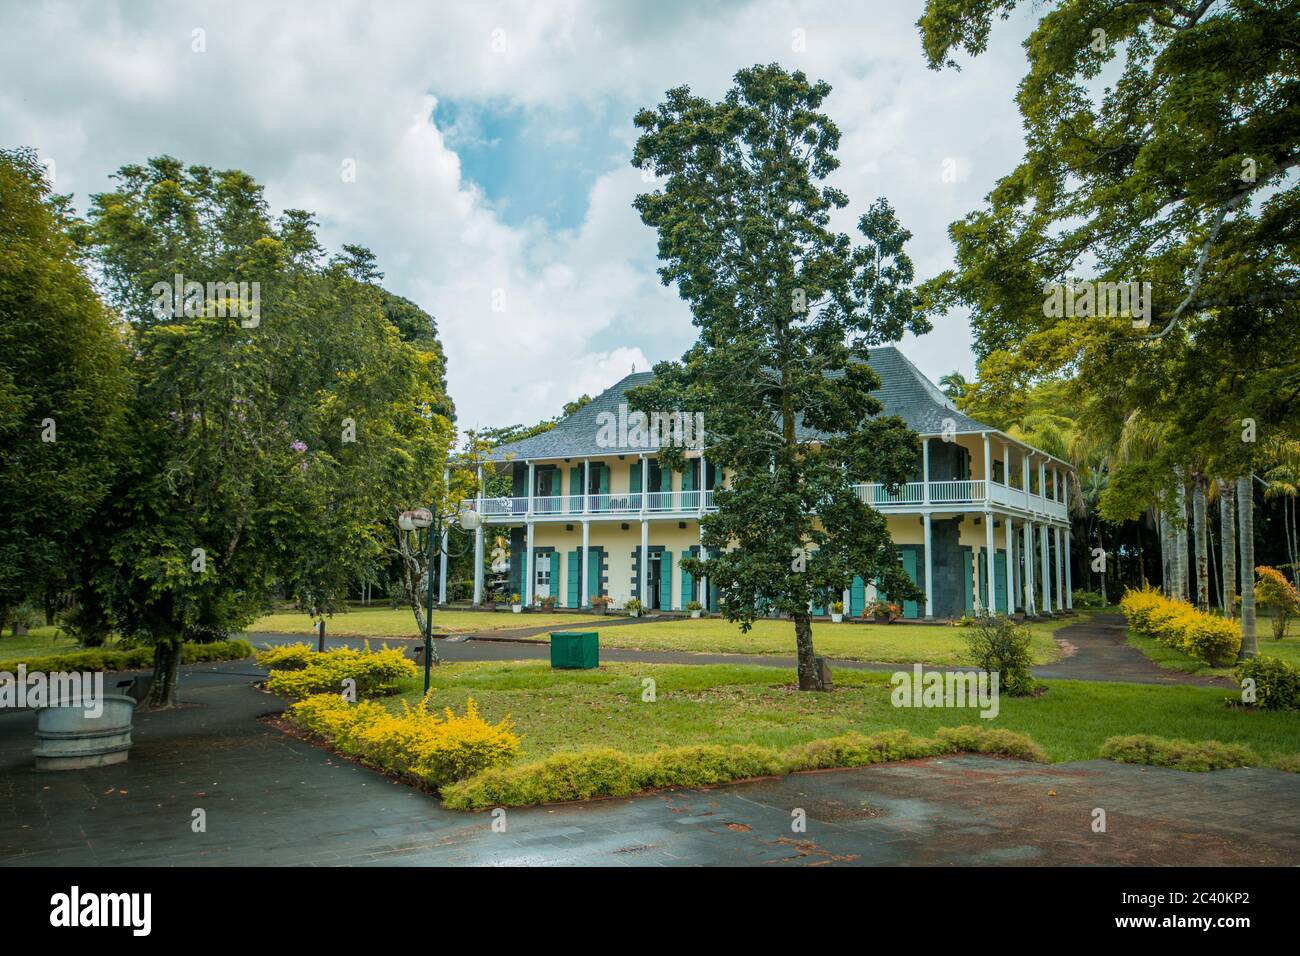 Old secession residence in Botanical Garden Pamplemousses, Mauritius. Stock Photo